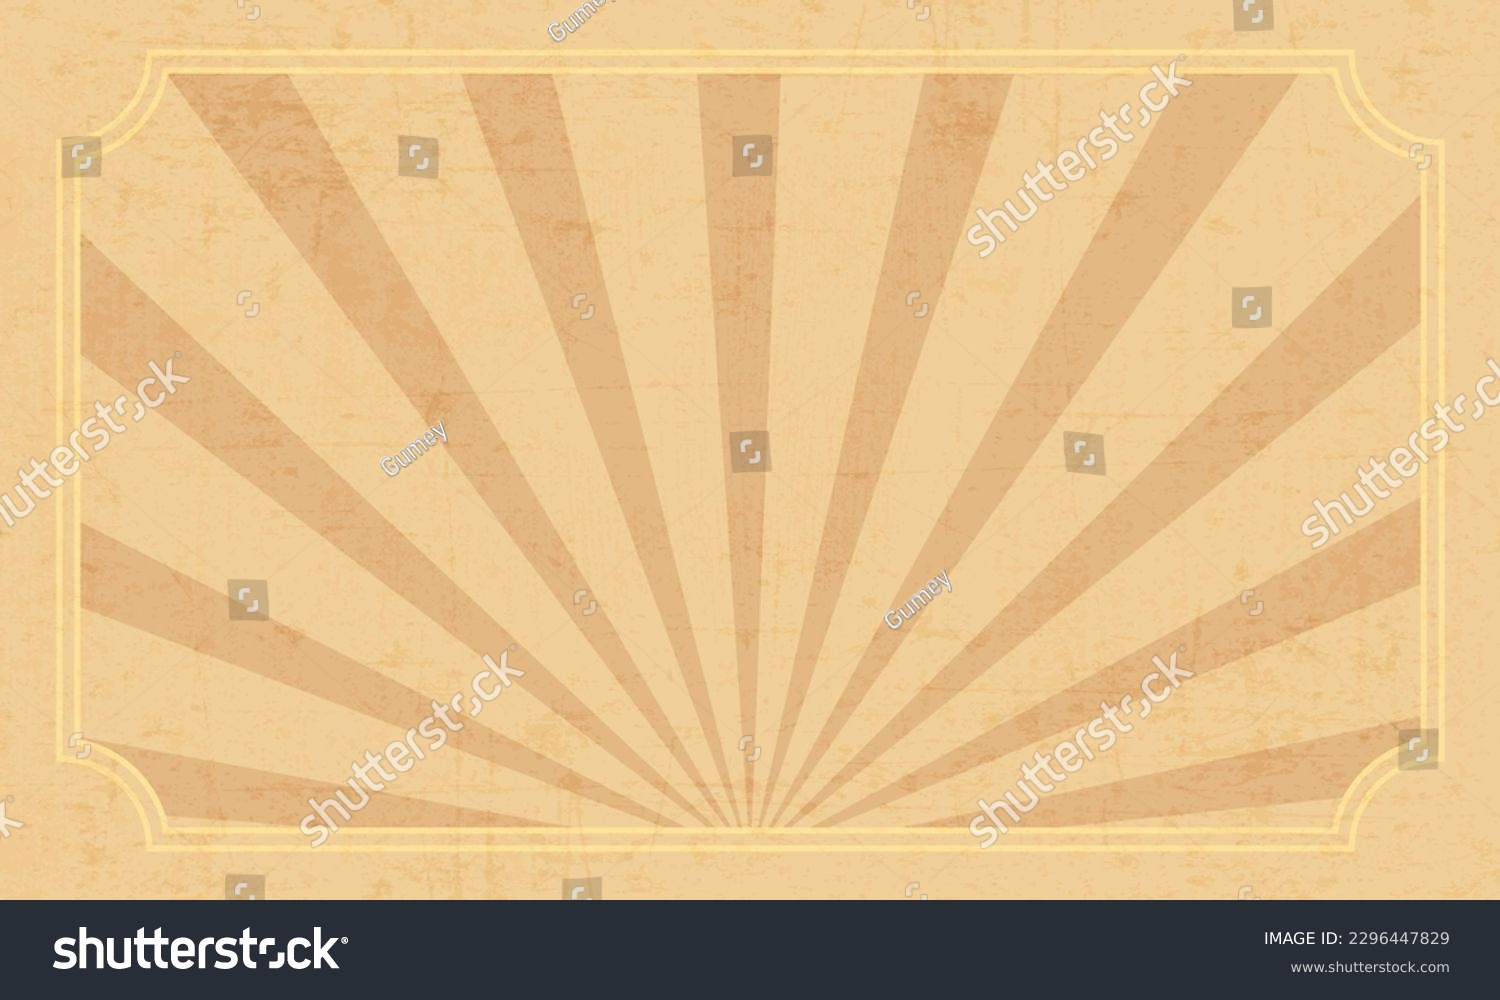 SVG of retro background with grunge texture, vector illustration svg